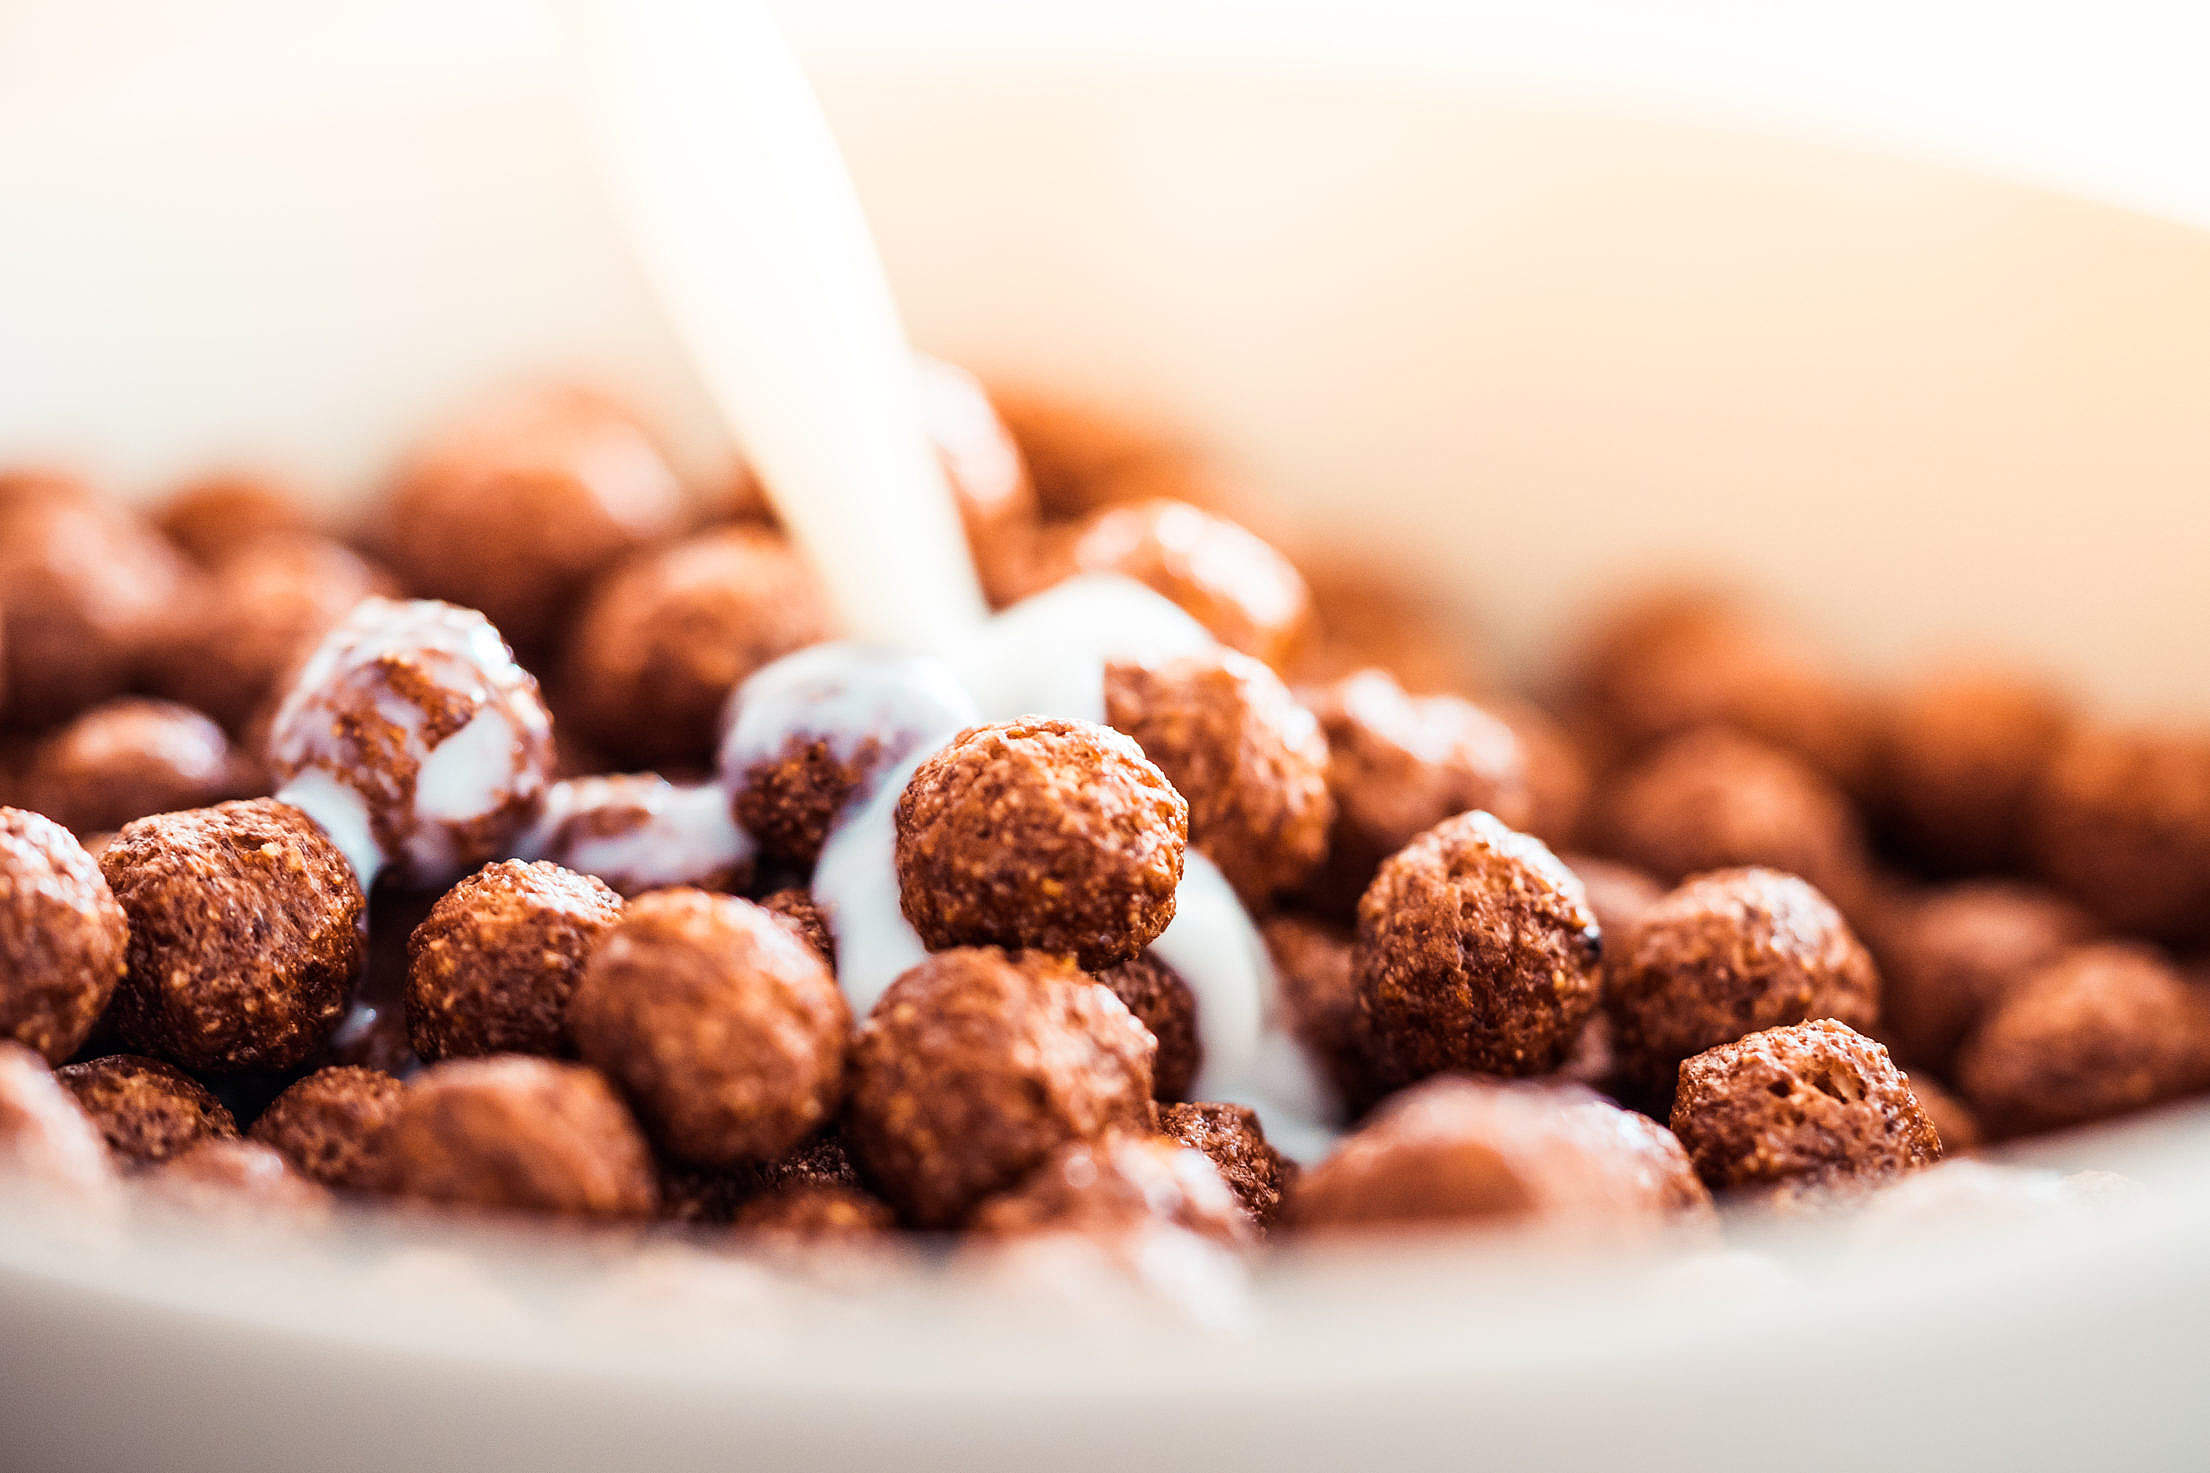 Milk Pouring on Cereal Chocolate Balls #2 Free Stock Photo